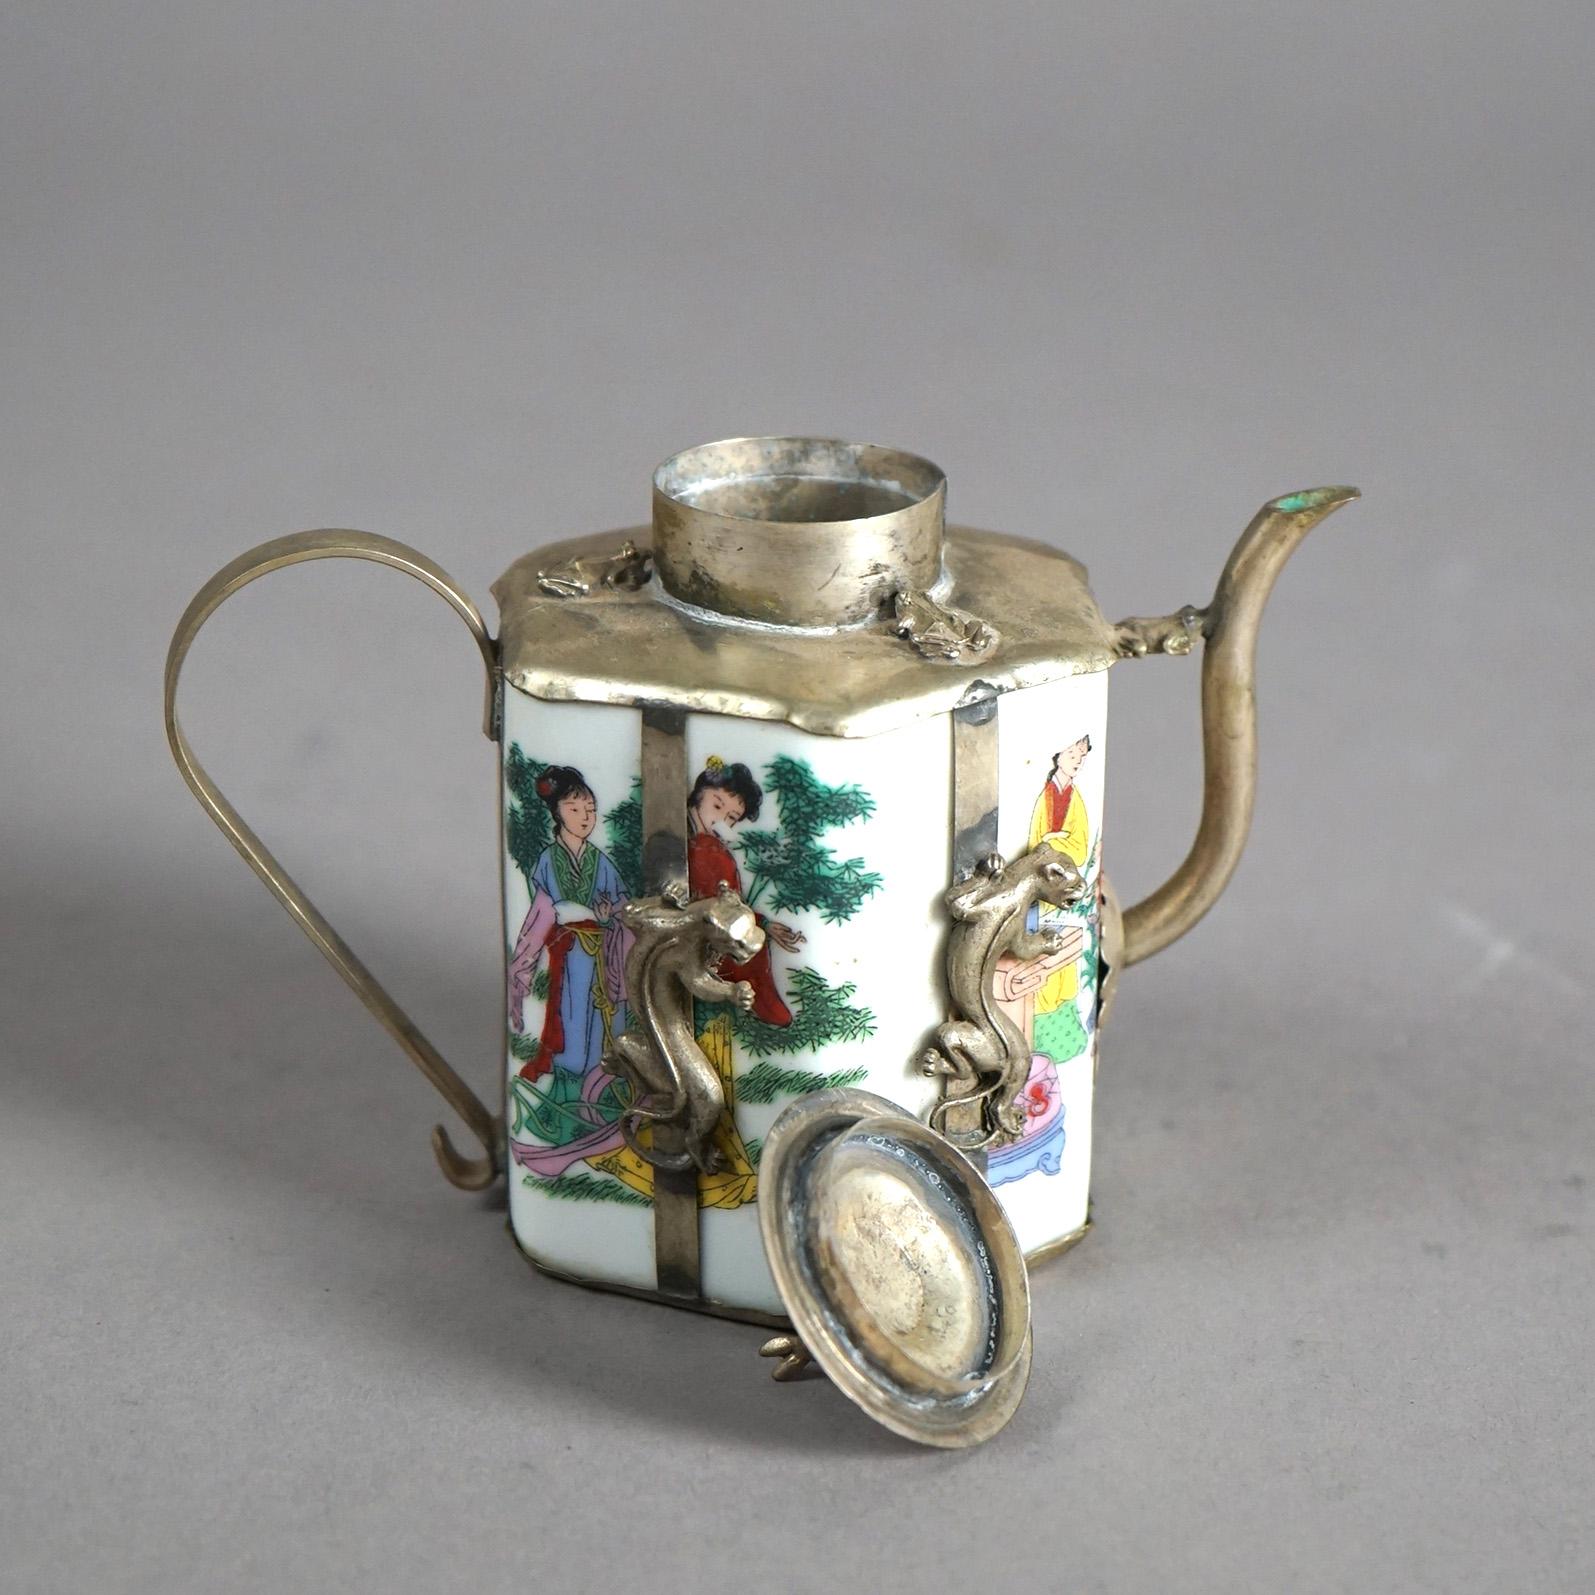 A Chinese miniature teapot offers porcelain vessel with hand painted figures, housed in silver overlay having figures, signed as photographed, 20th century

Measures- 4.25''H x 5''W x 3''D